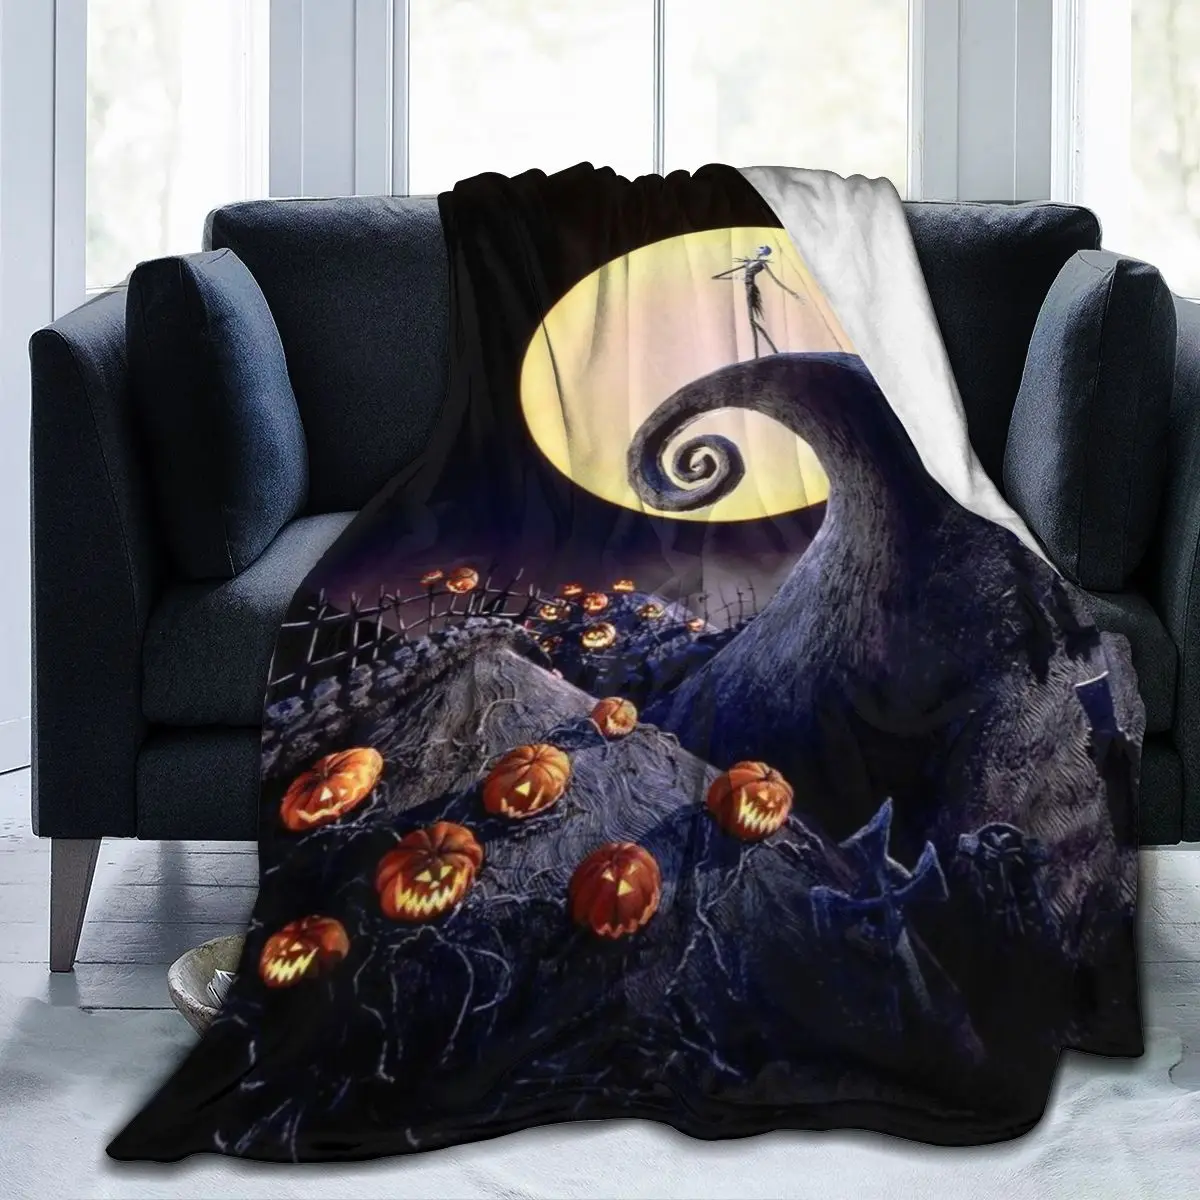 NIGHTMARE BEFORE CHRISTMAS KING SIZE QUILTS TRAVEL BLANKET 